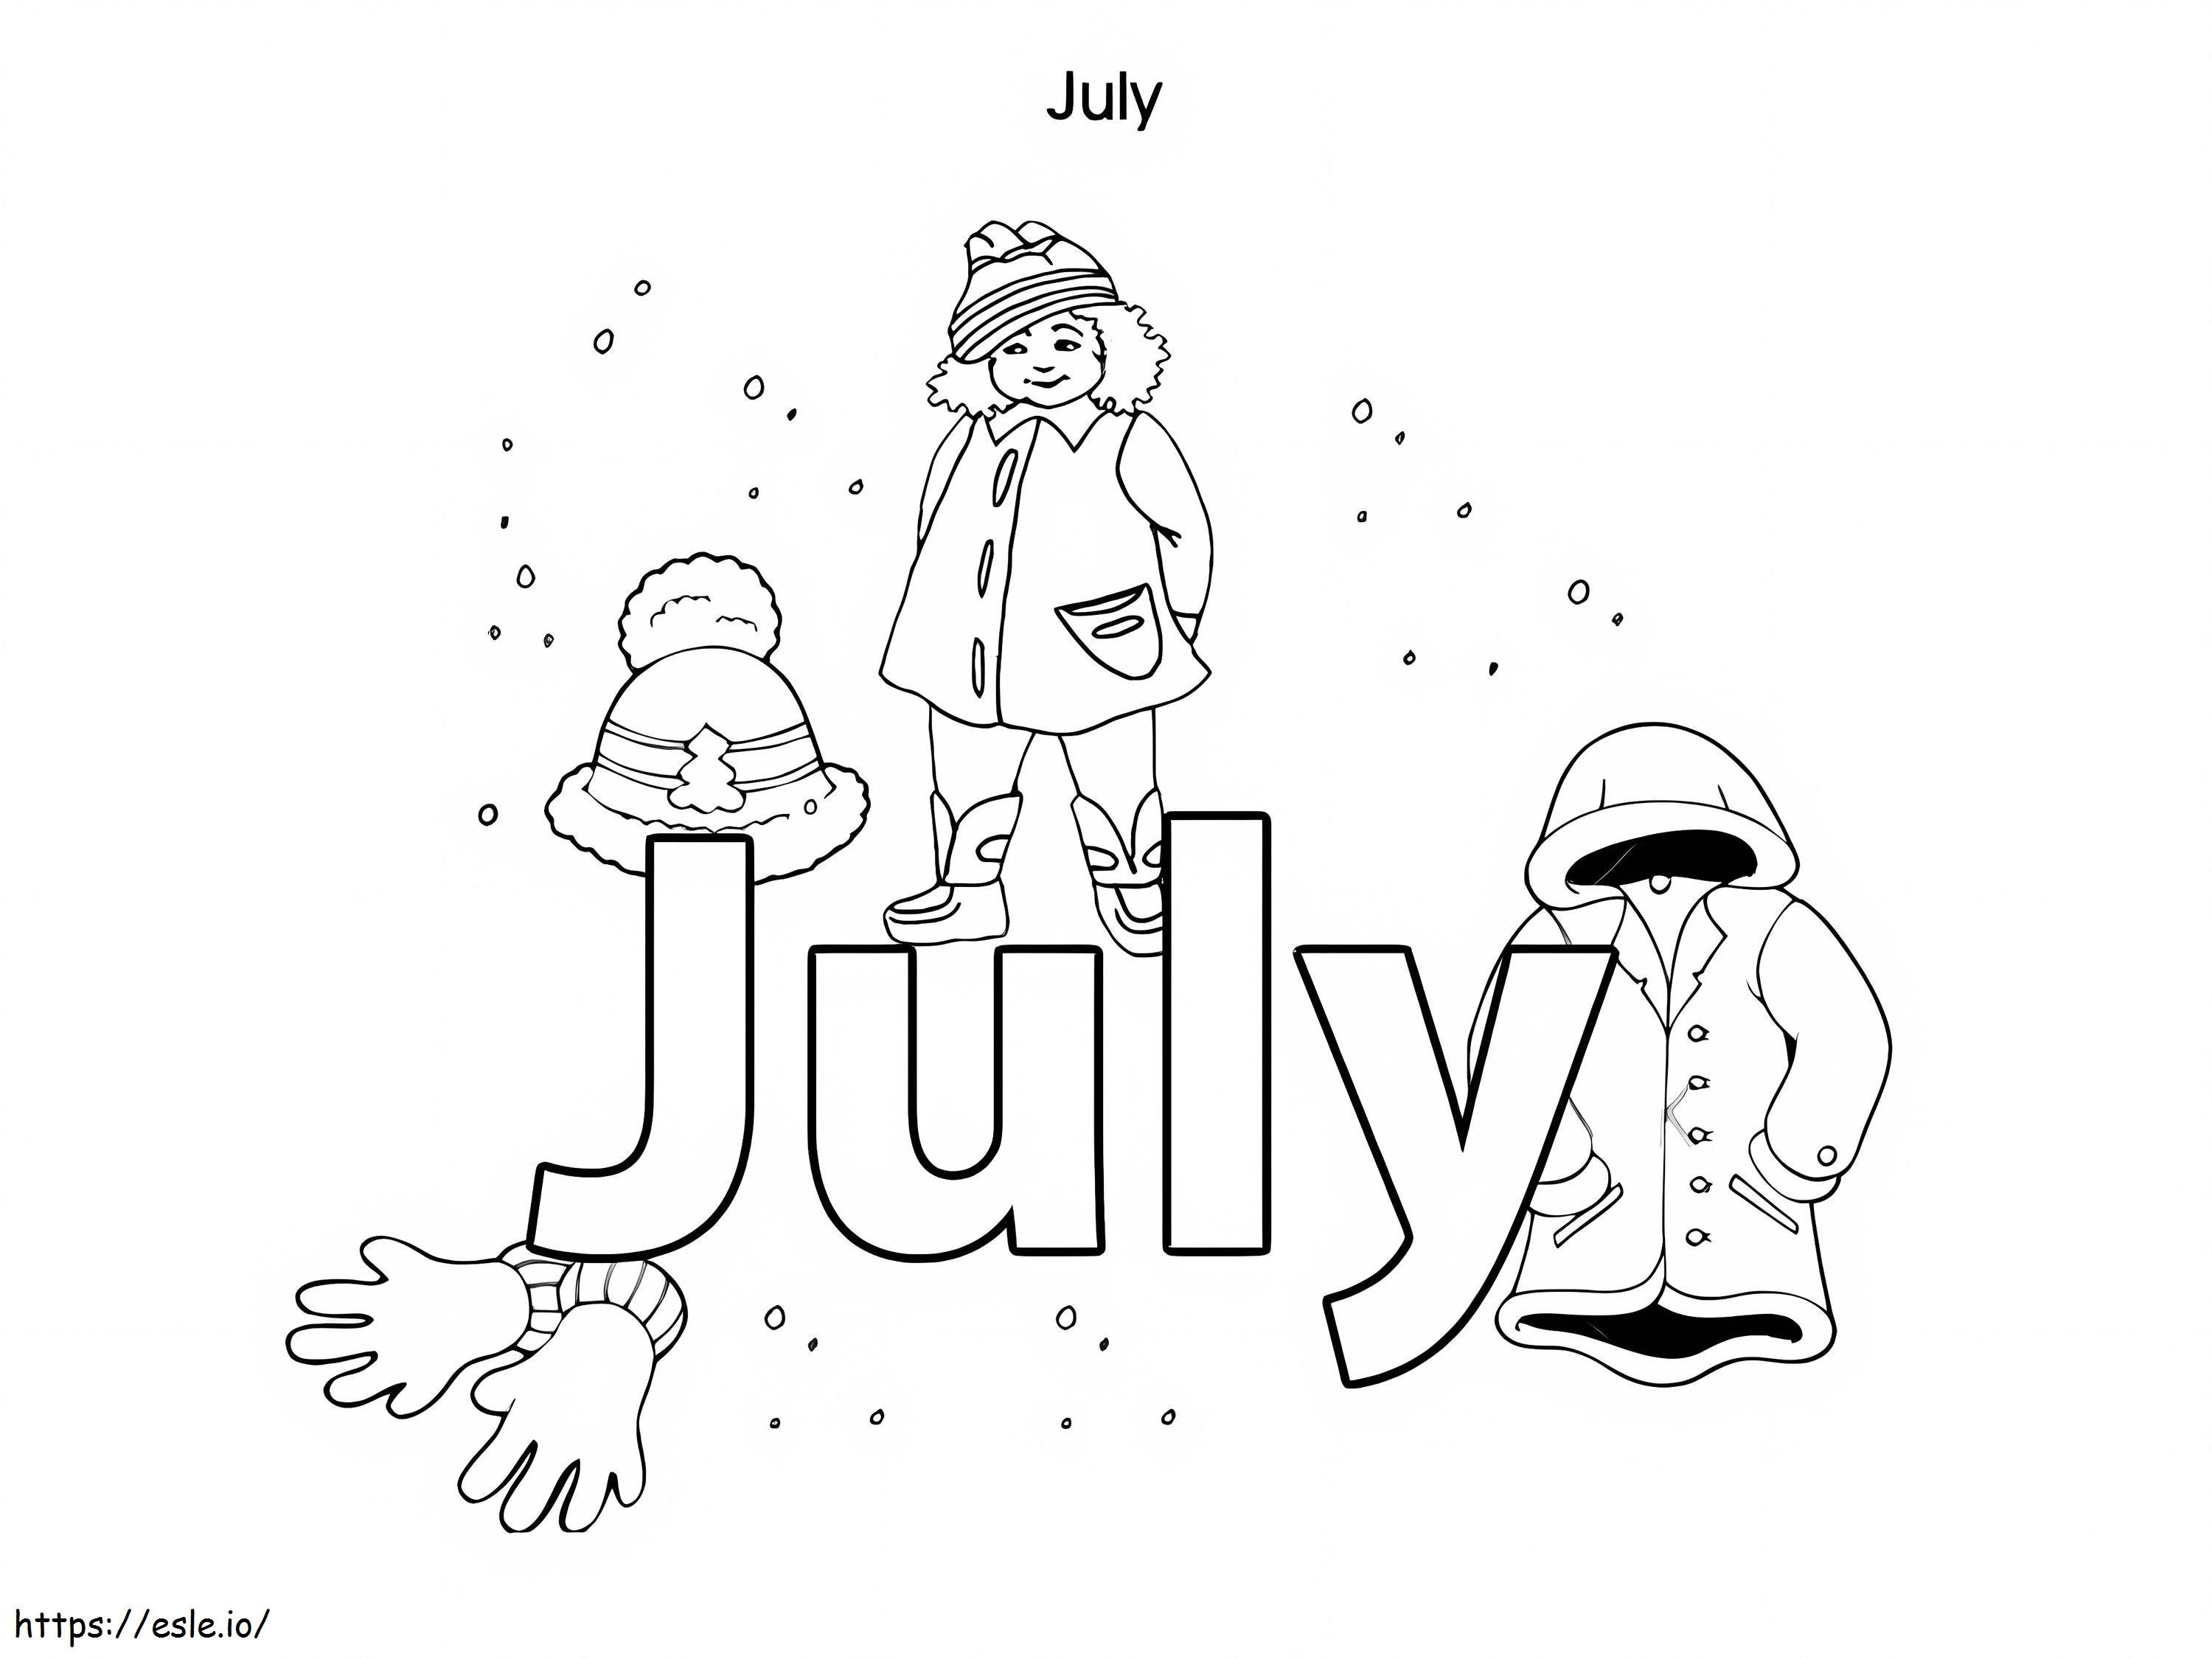 Children With July coloring page